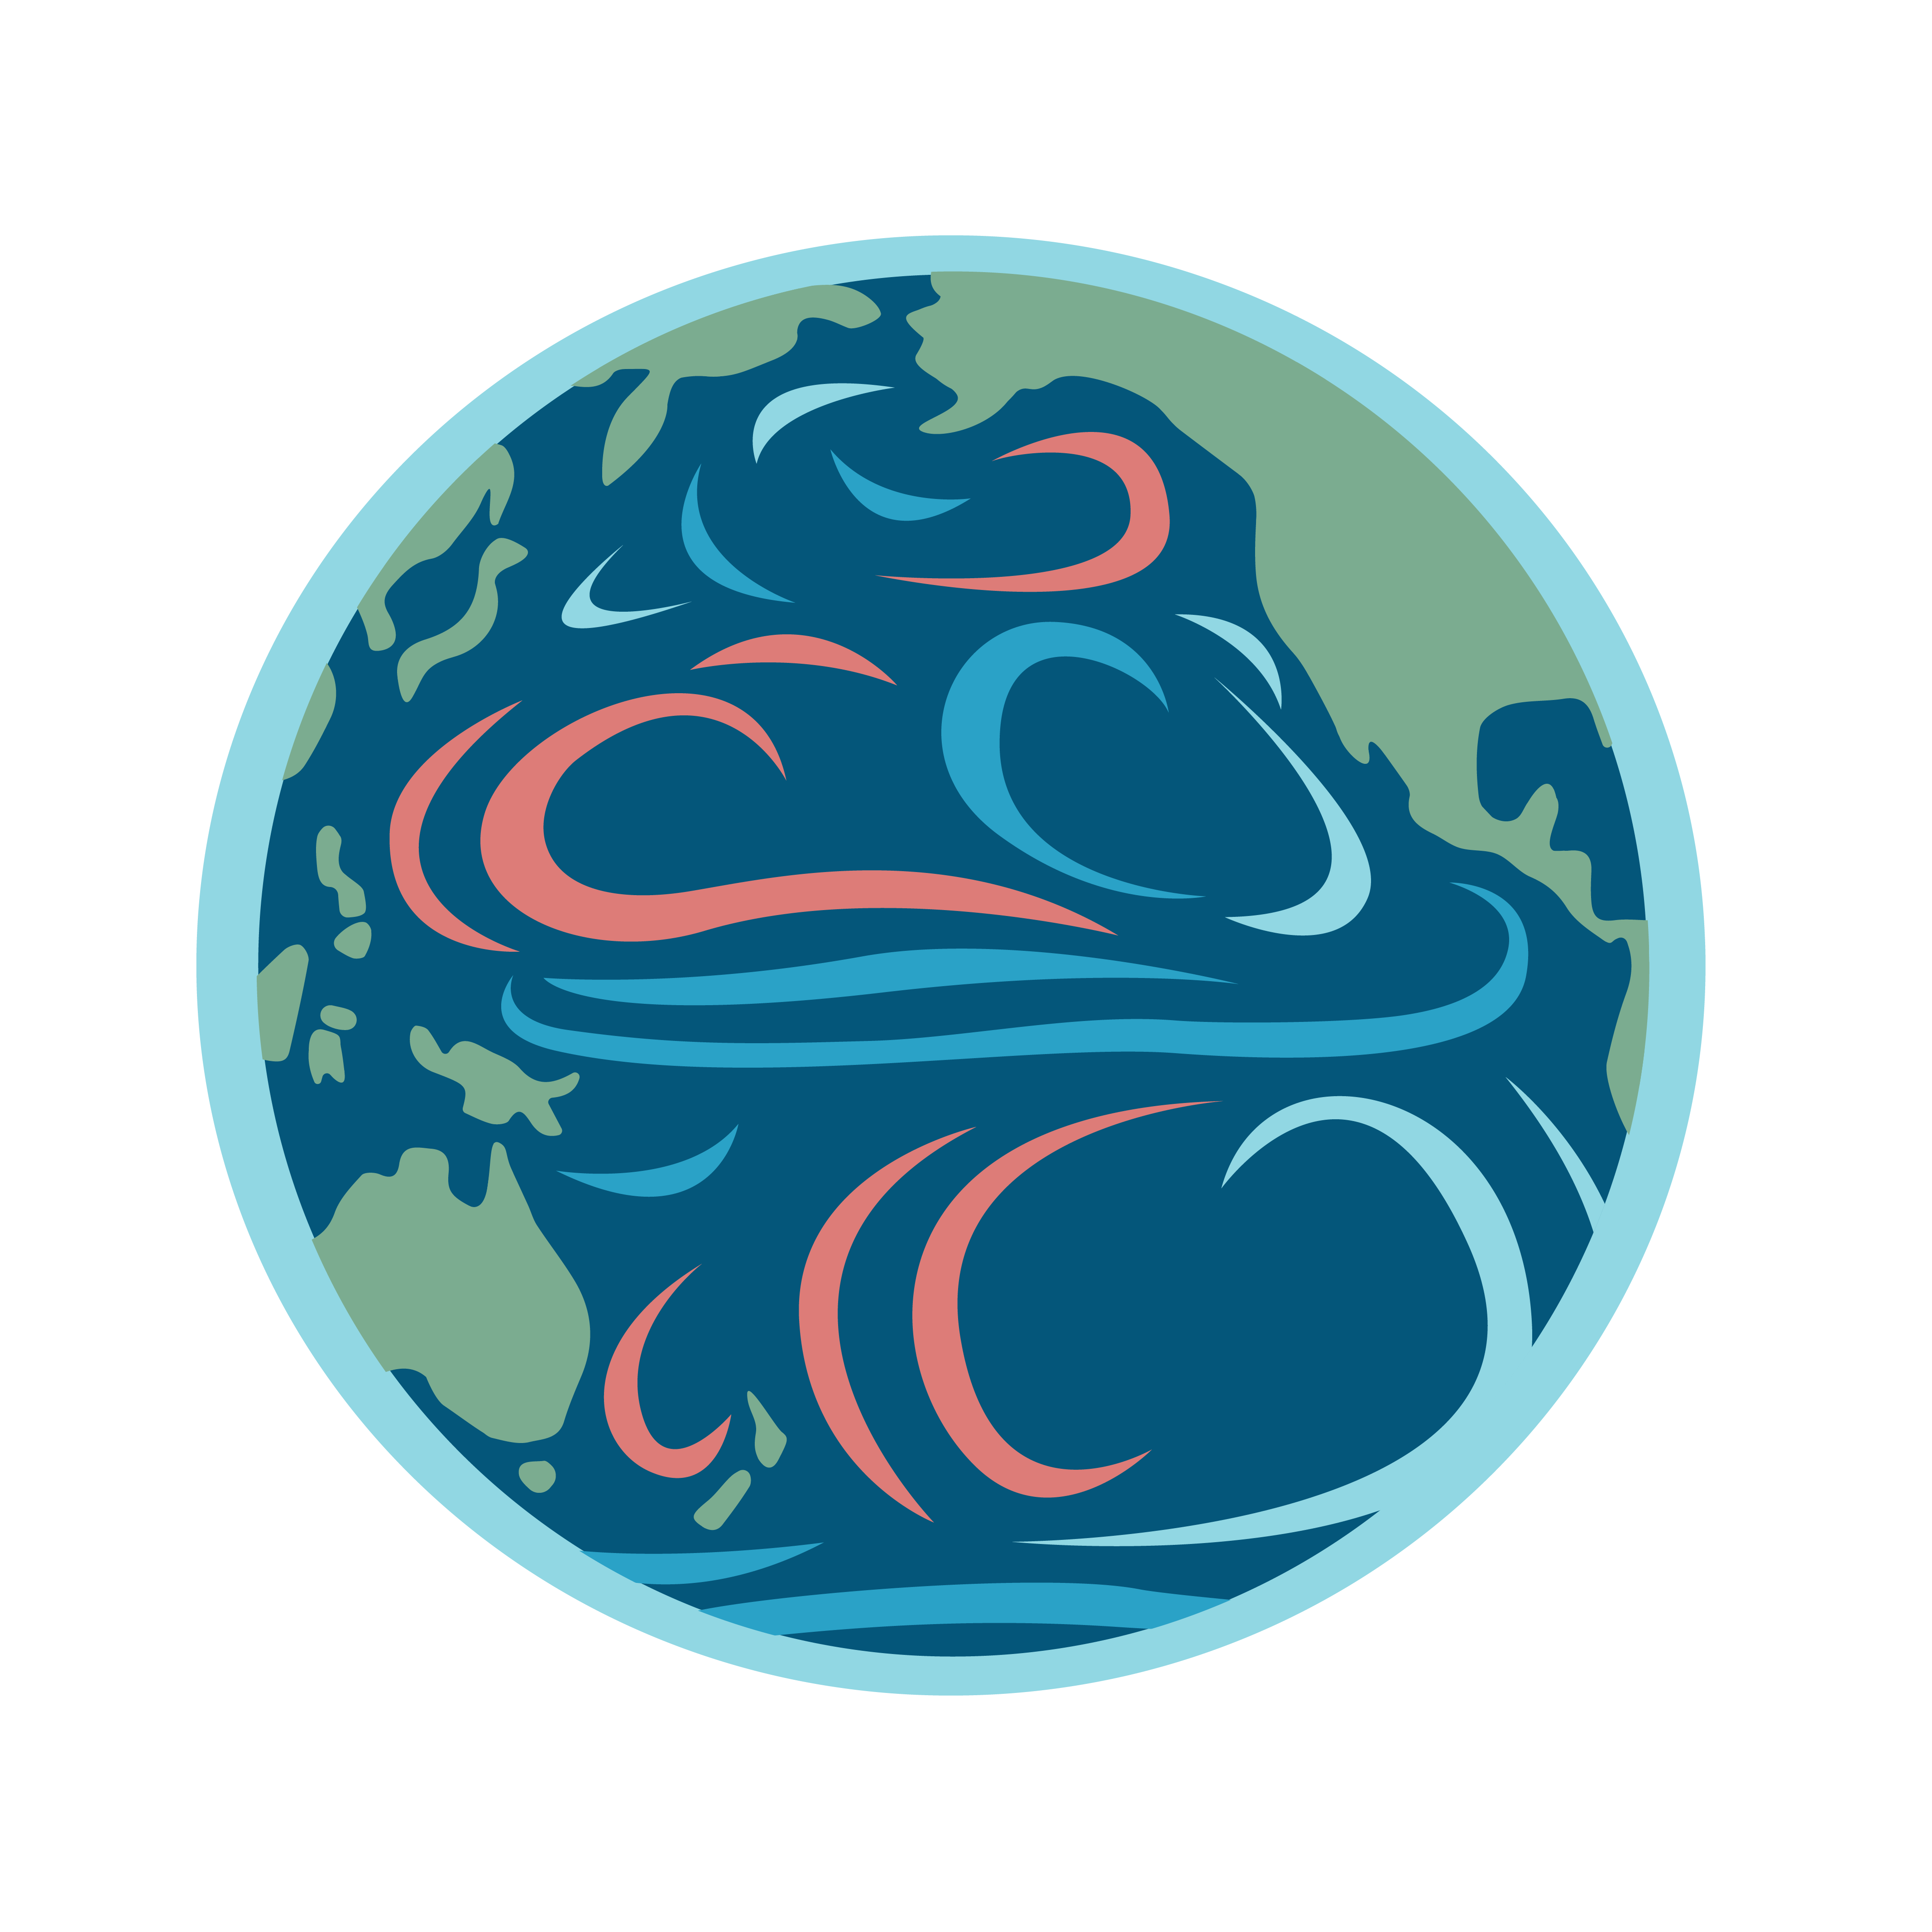 A graphic of the Earth with illustrated ocean currents on the surface of the ocean. Some currents are red, depicting warmer currents, and others are blue, depicting colder currents.